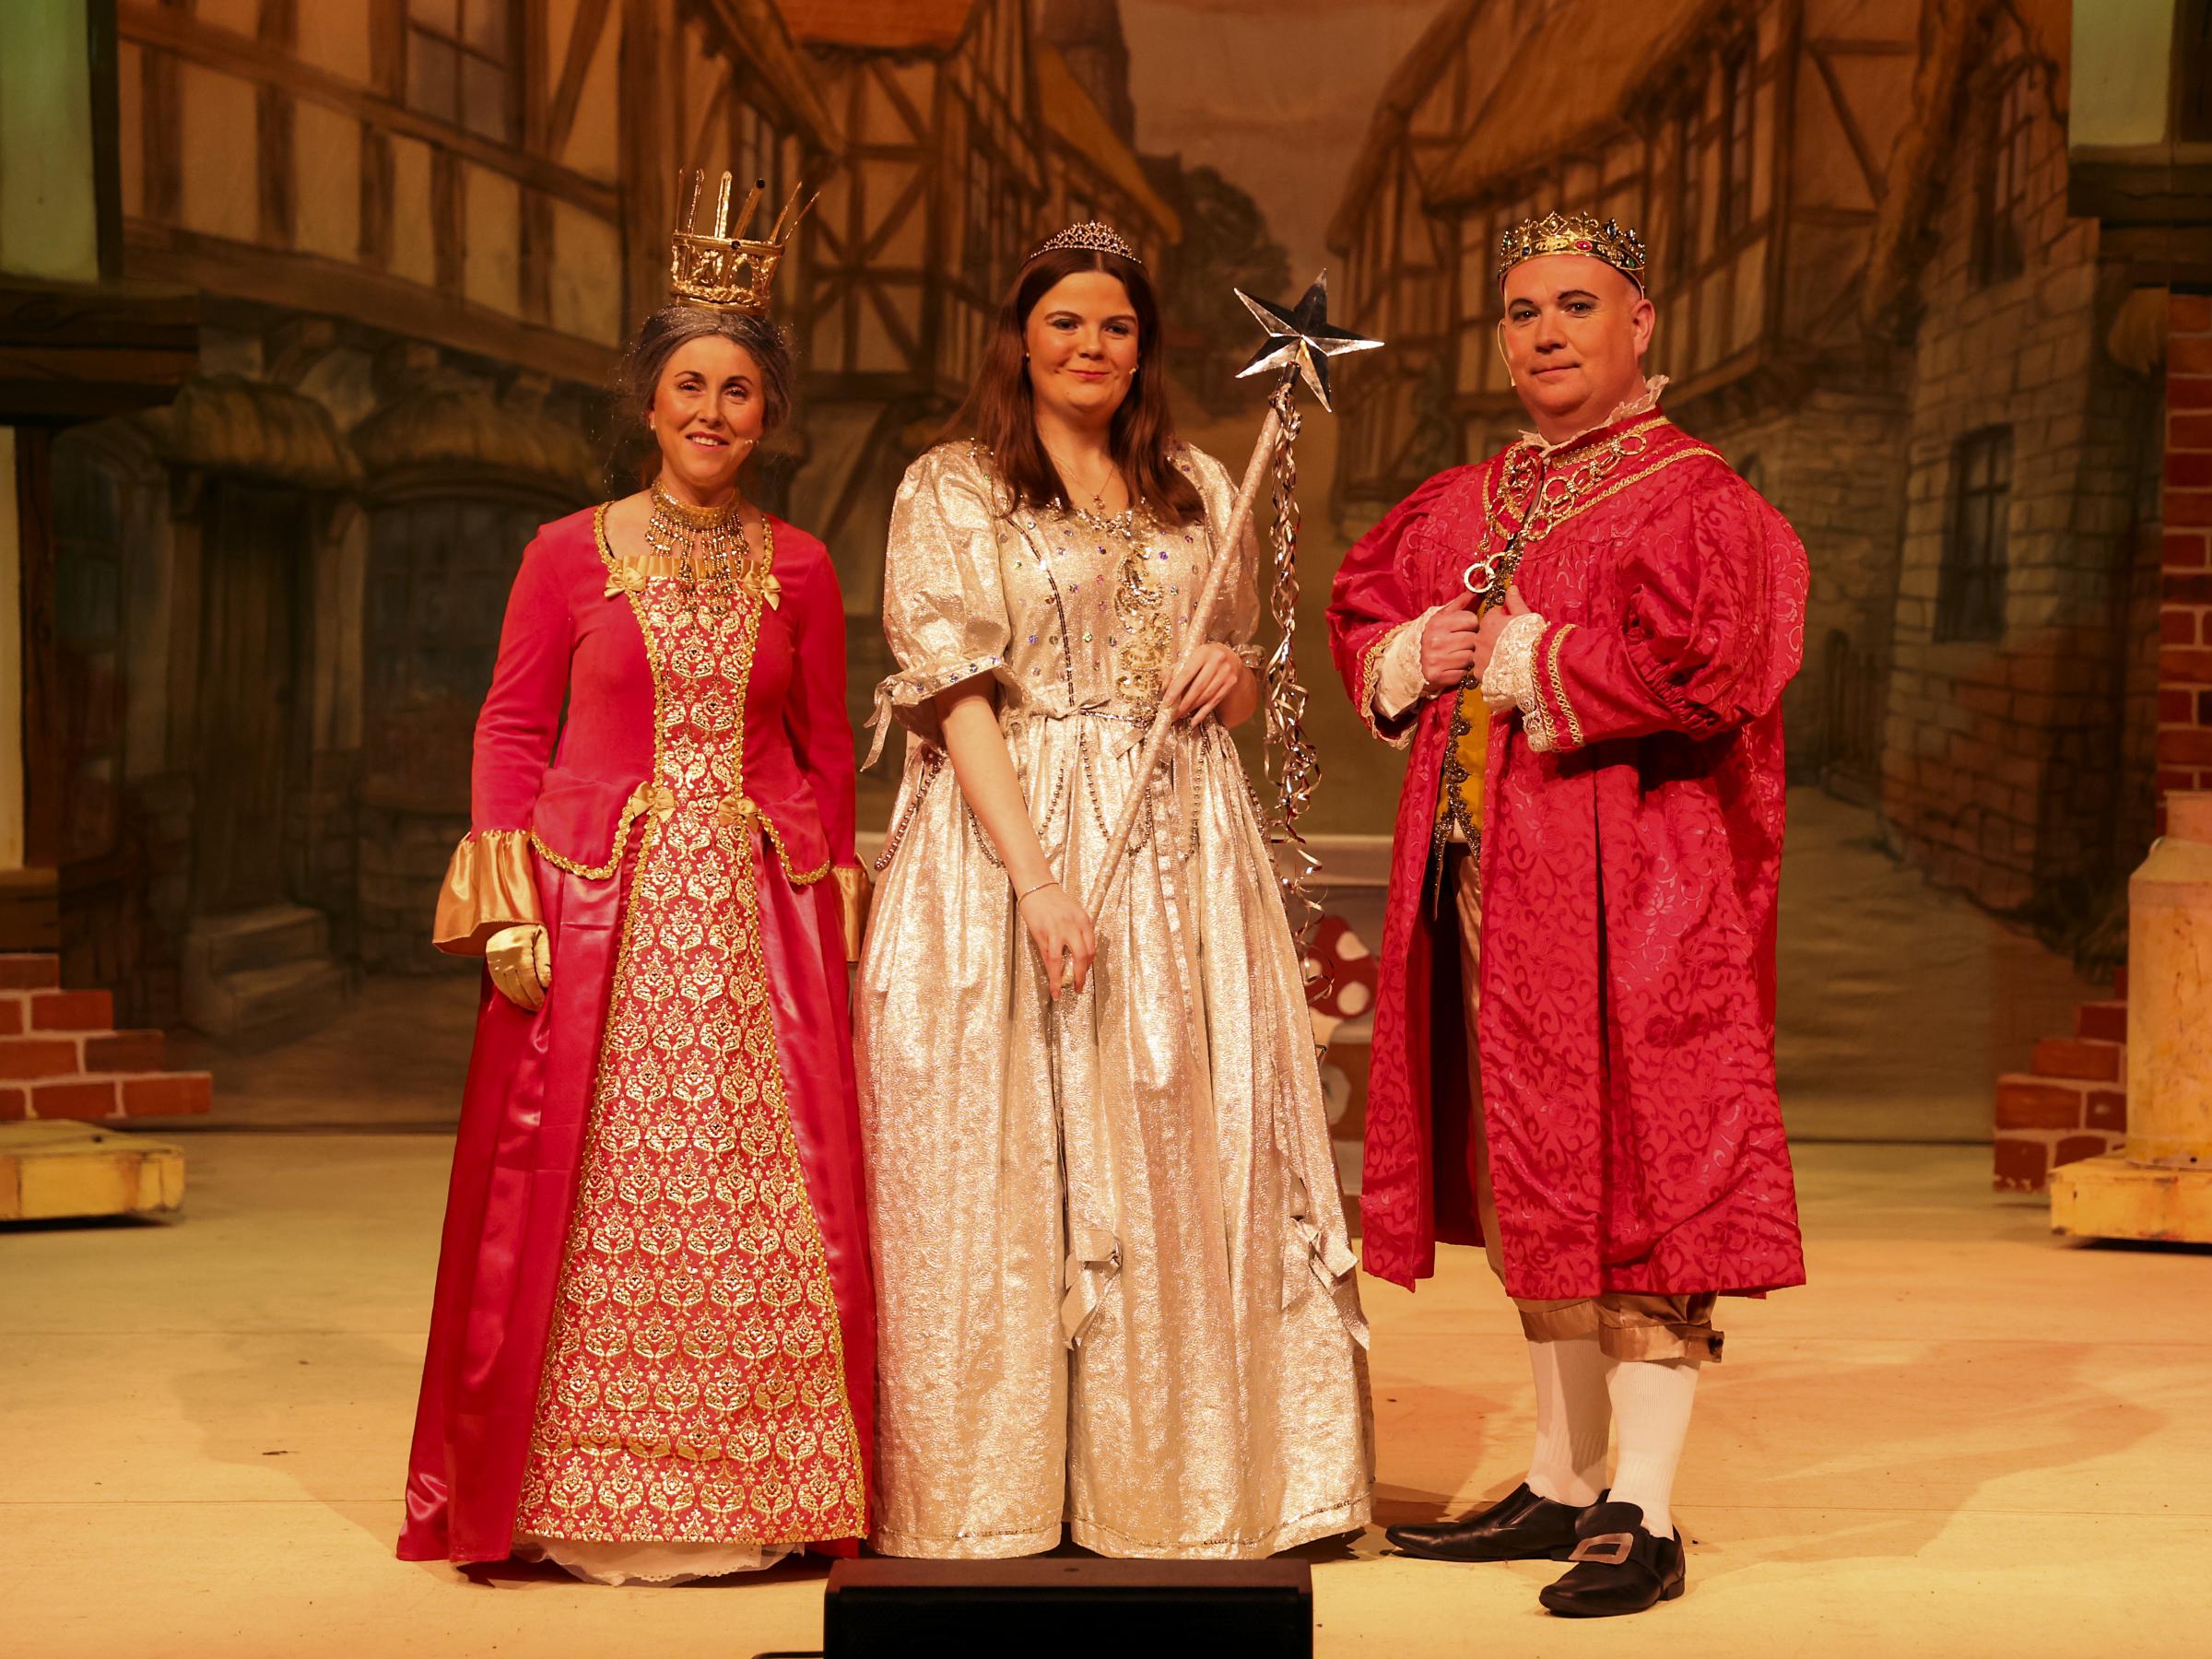 The Queen (Ashling Donohoe) Fairy (Ellie Flanagan) and The King (Stephen Watson).